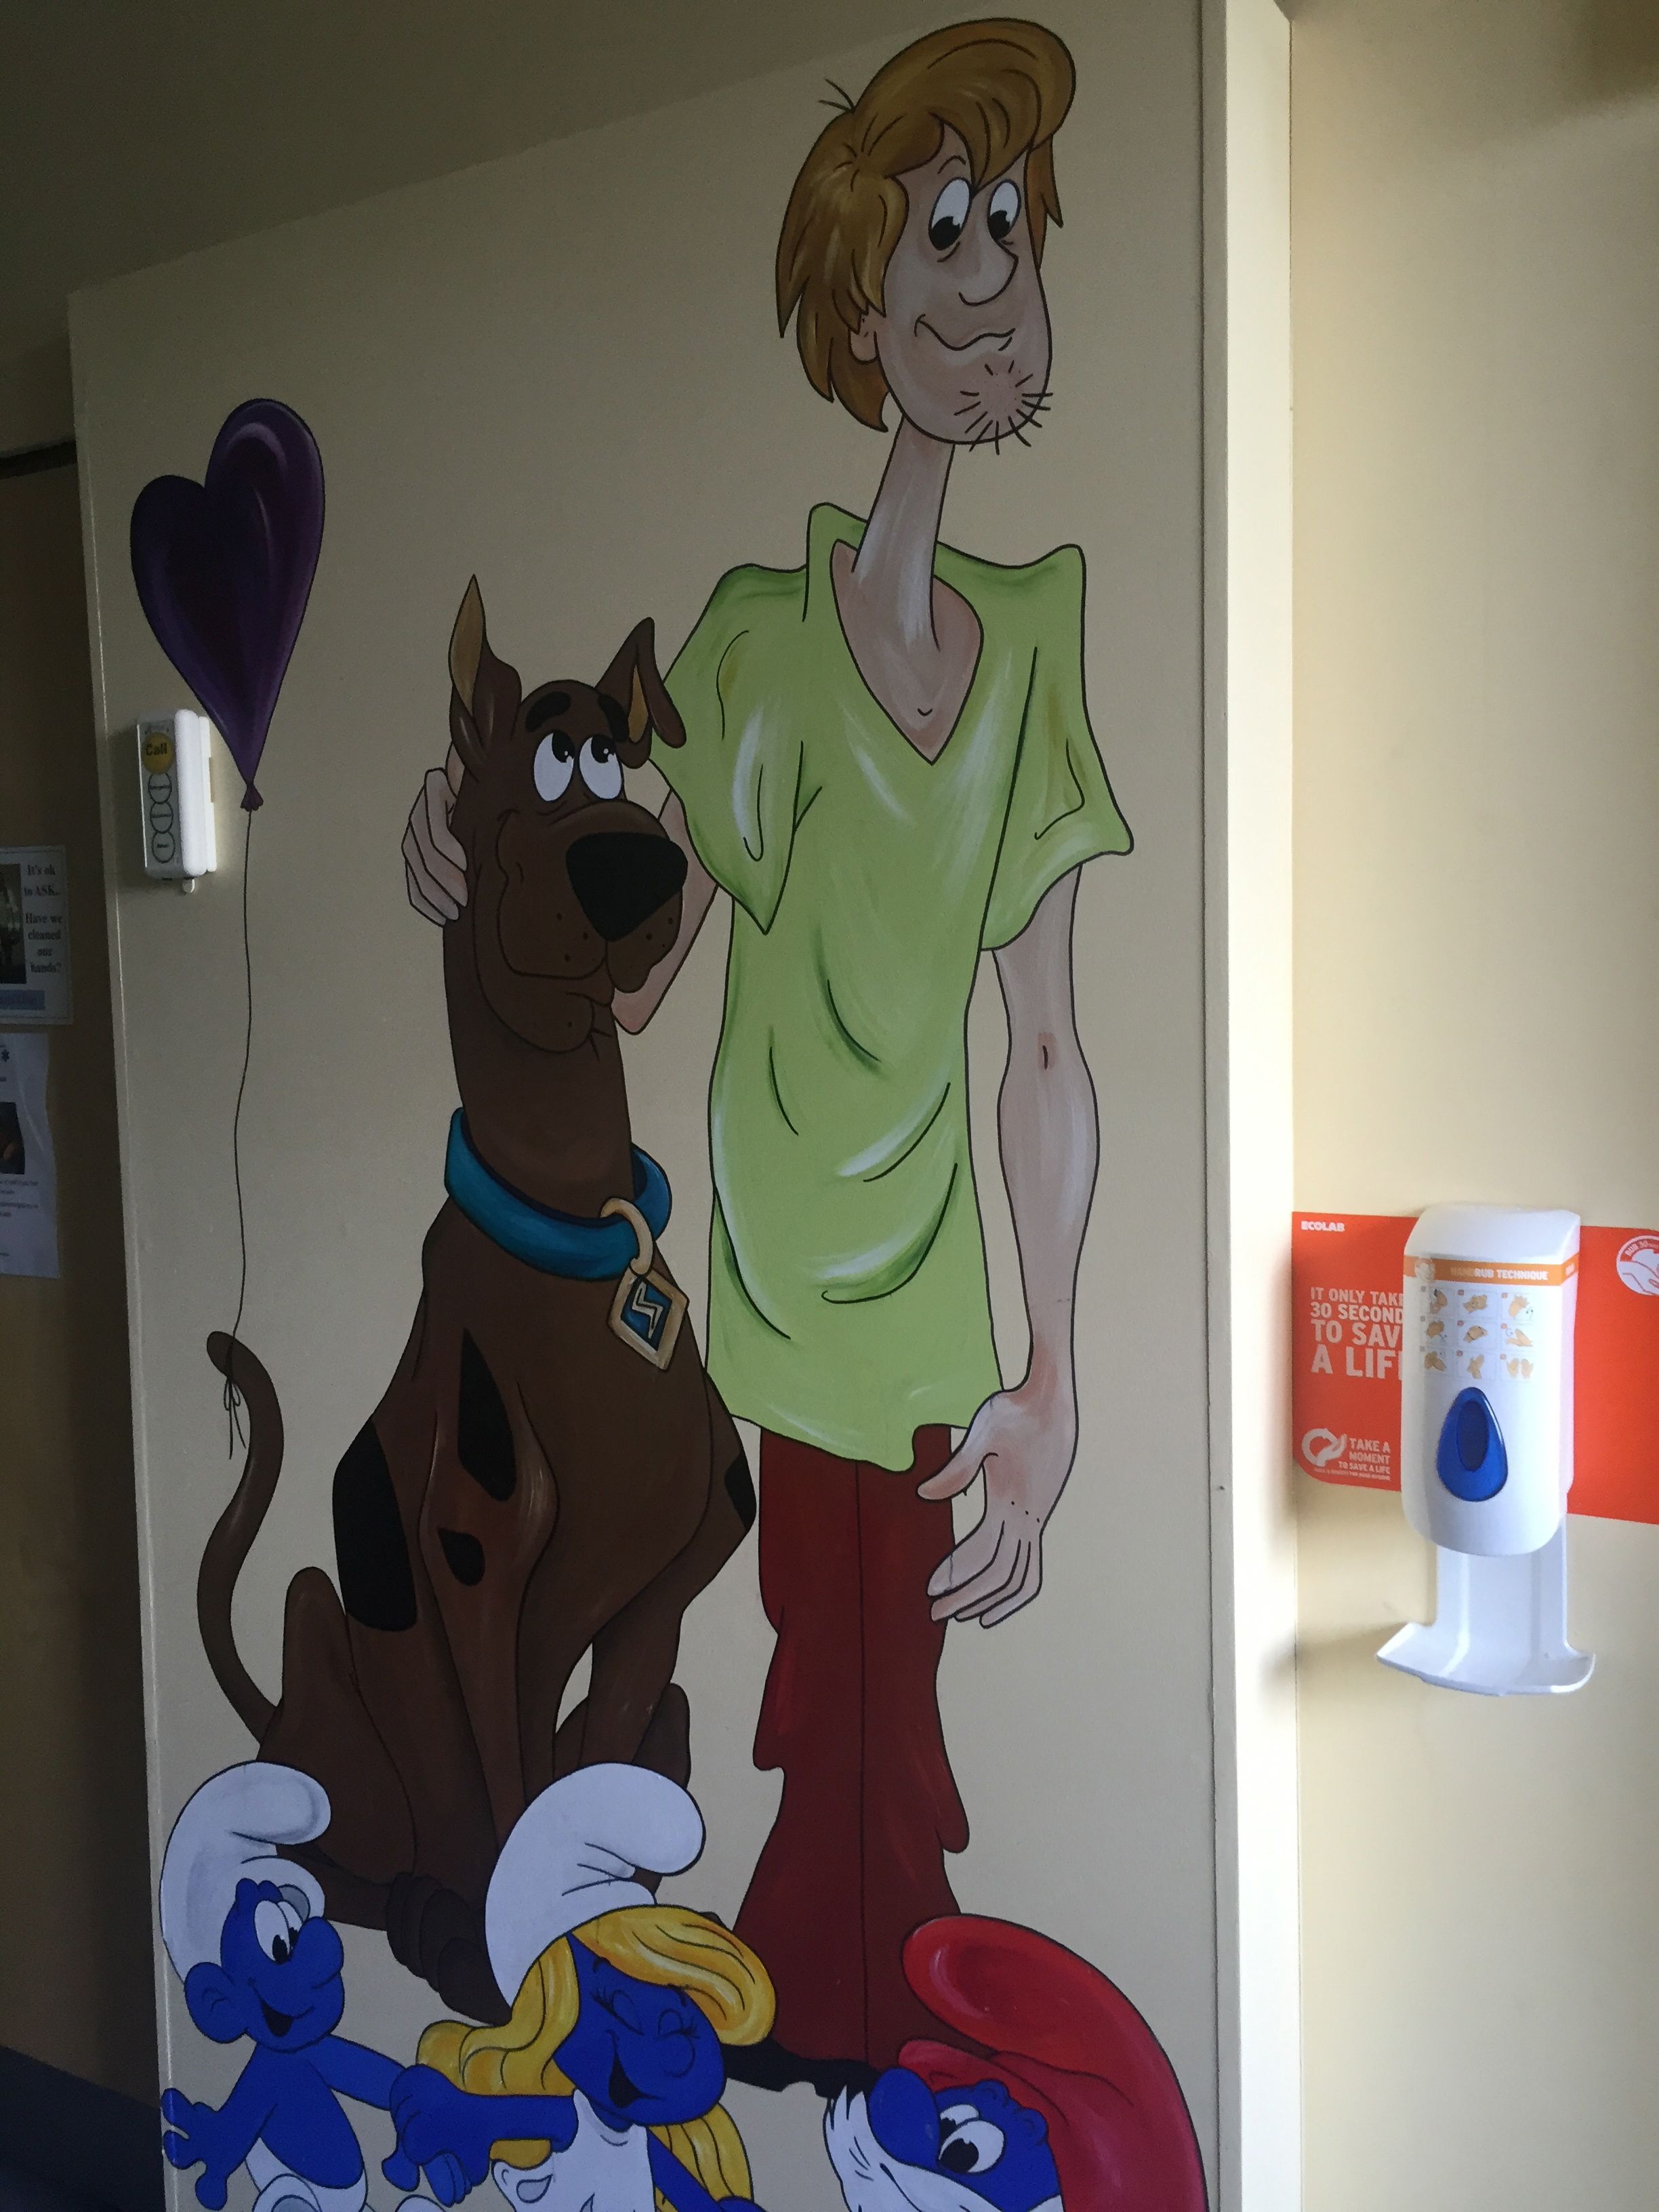 shaggy and scooby